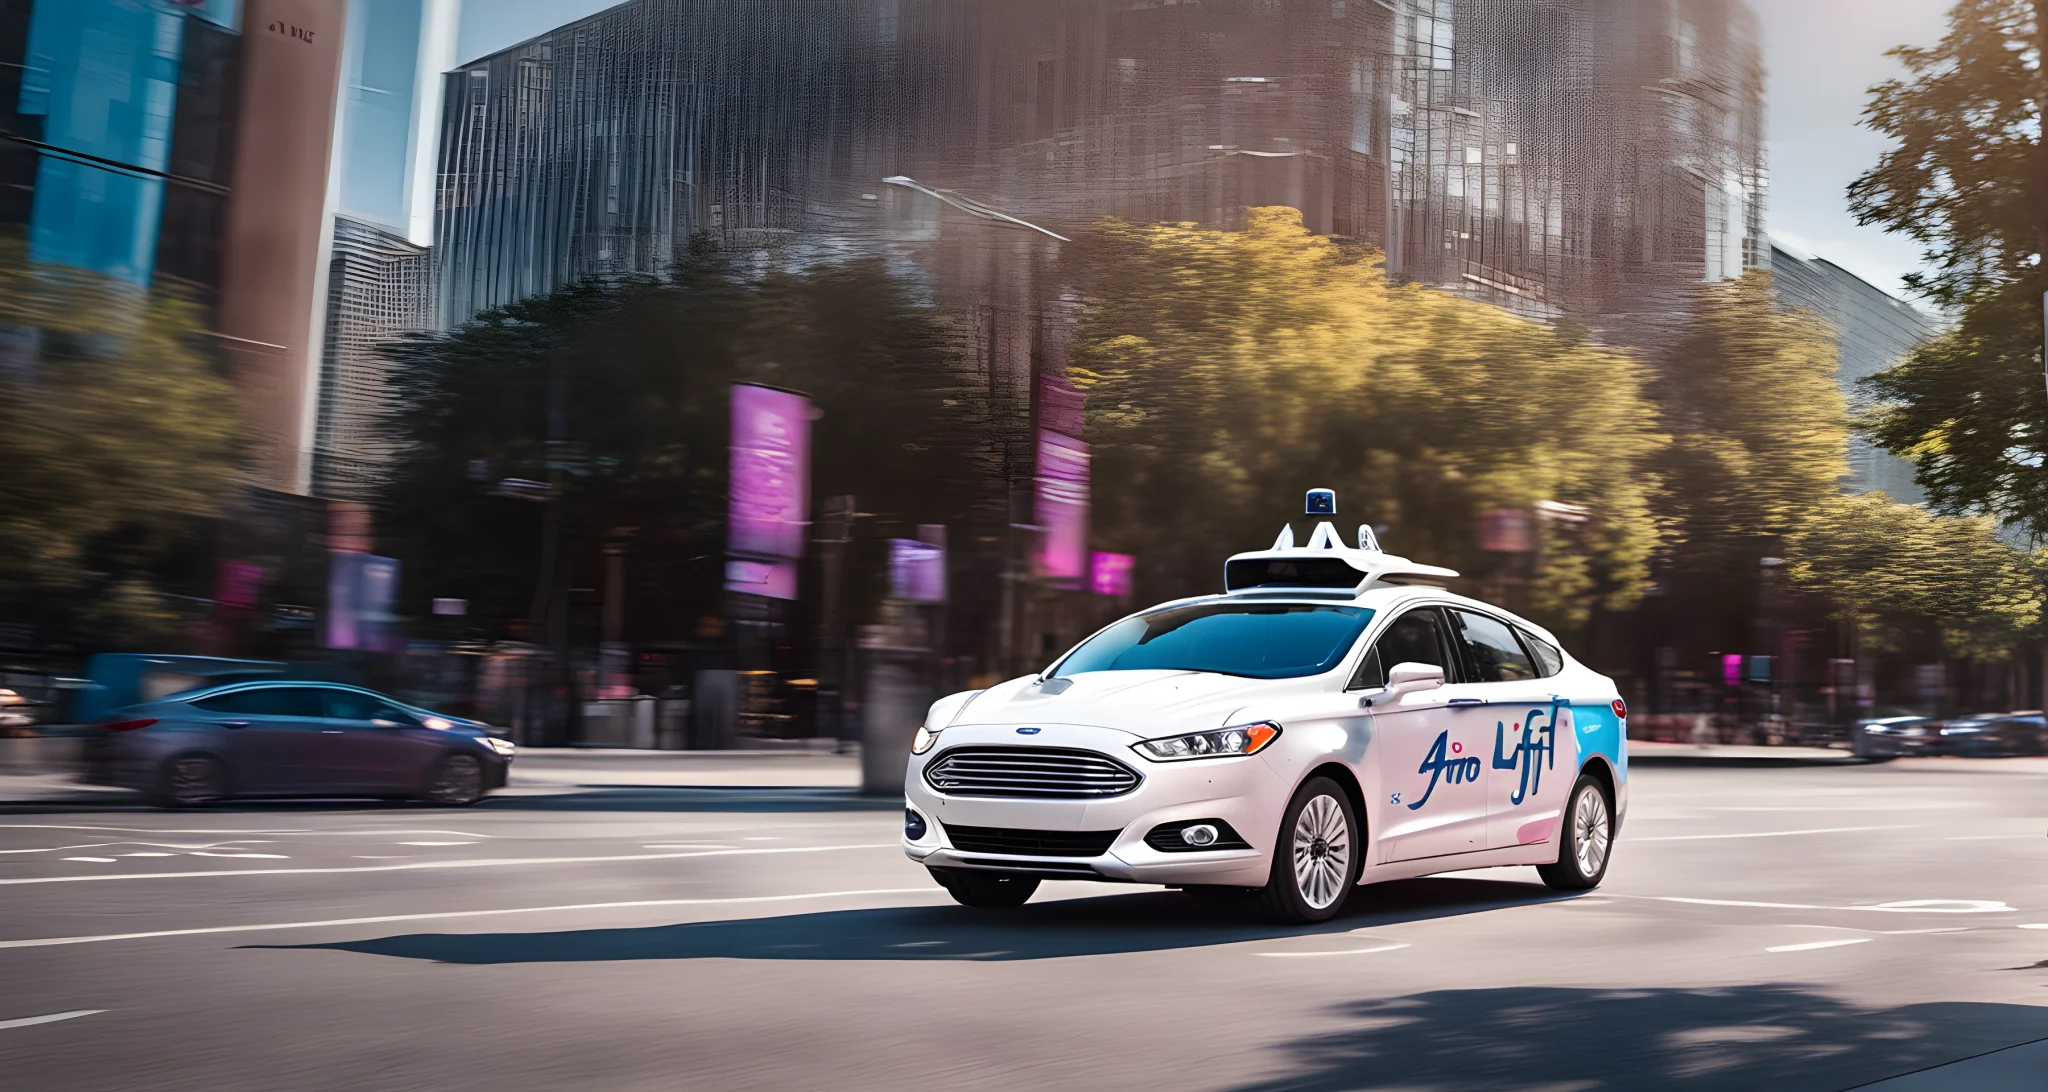 The image shows a Ford self-driving car, with the Argo AI and Lyft logos displayed prominently on the vehicle.